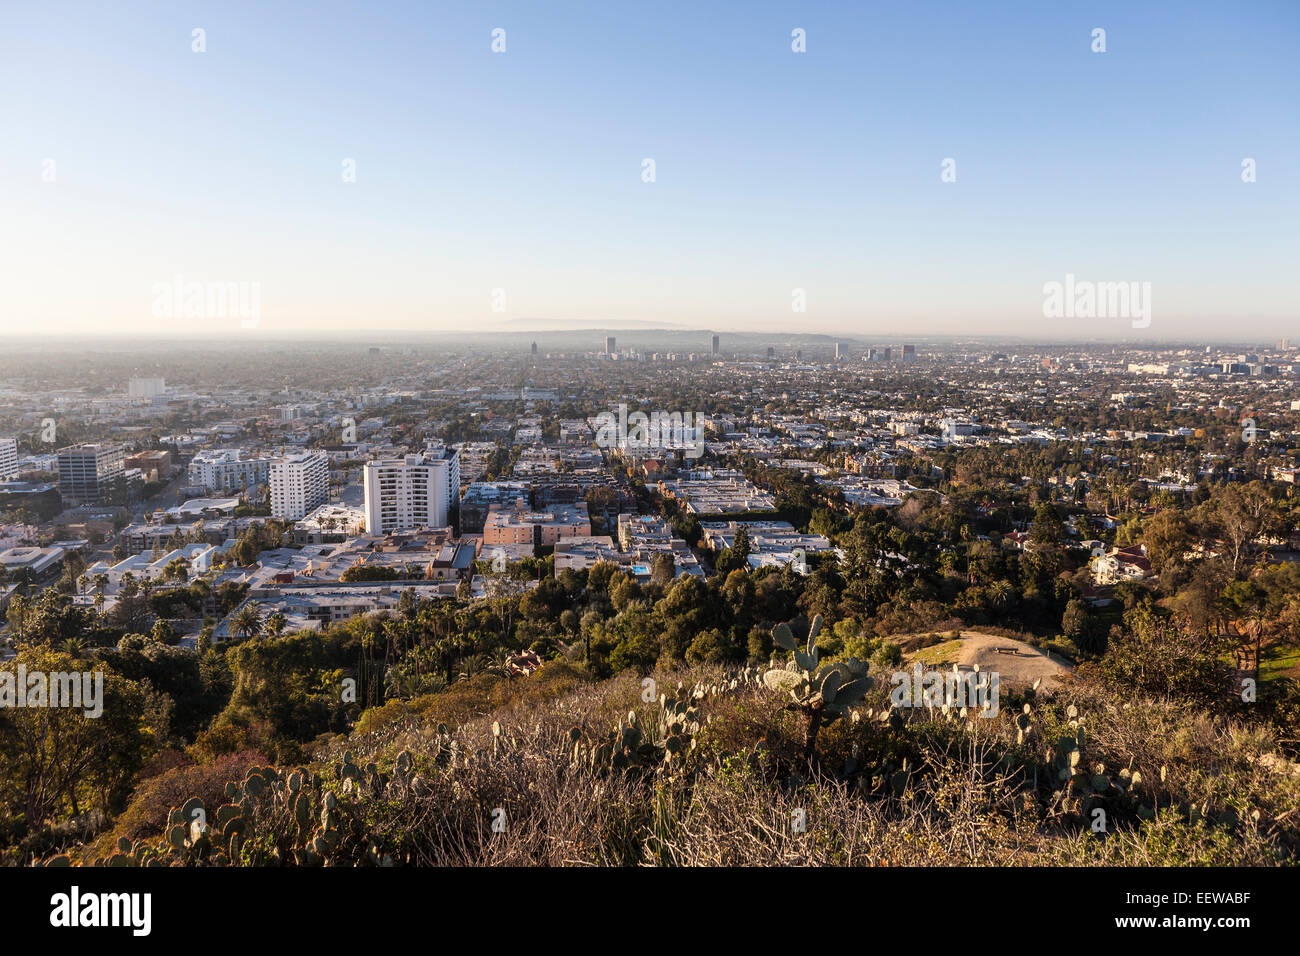 West Hollywood and Los Angeles early morning hilltop view in Southern California. Stock Photo